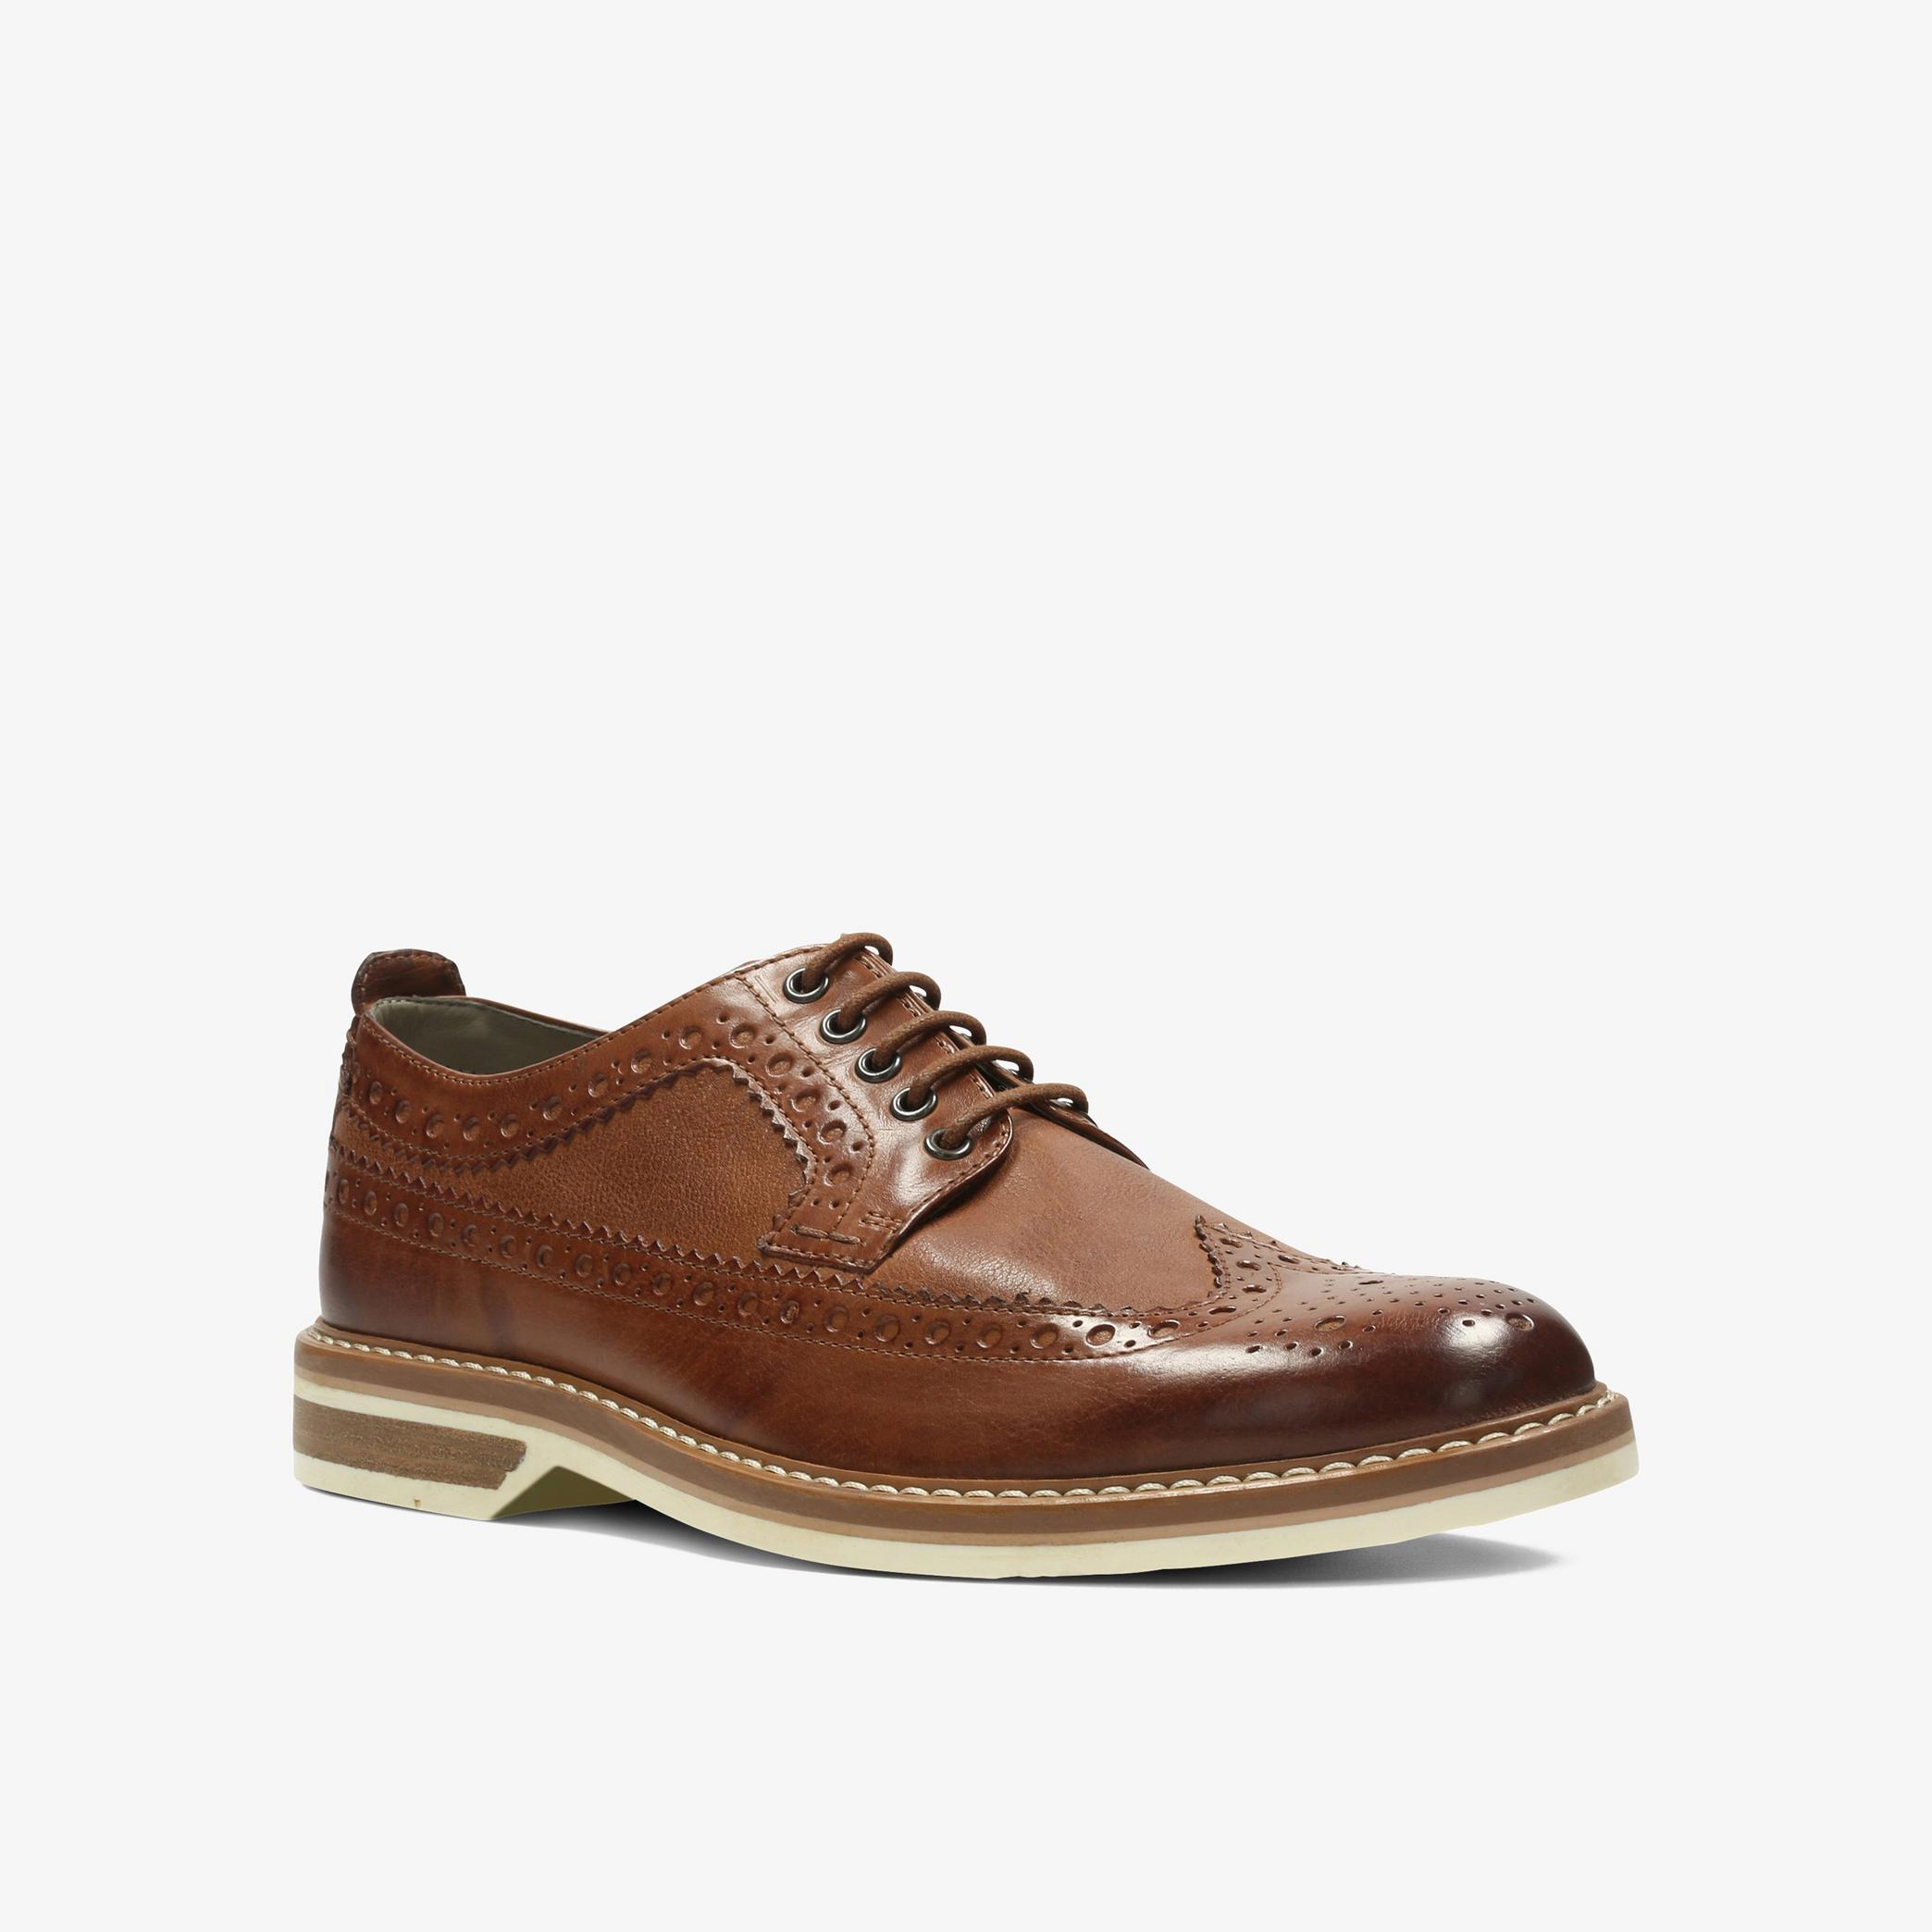 MENS Pitney Limit Tan Leather Shoes | Clarks Outlet